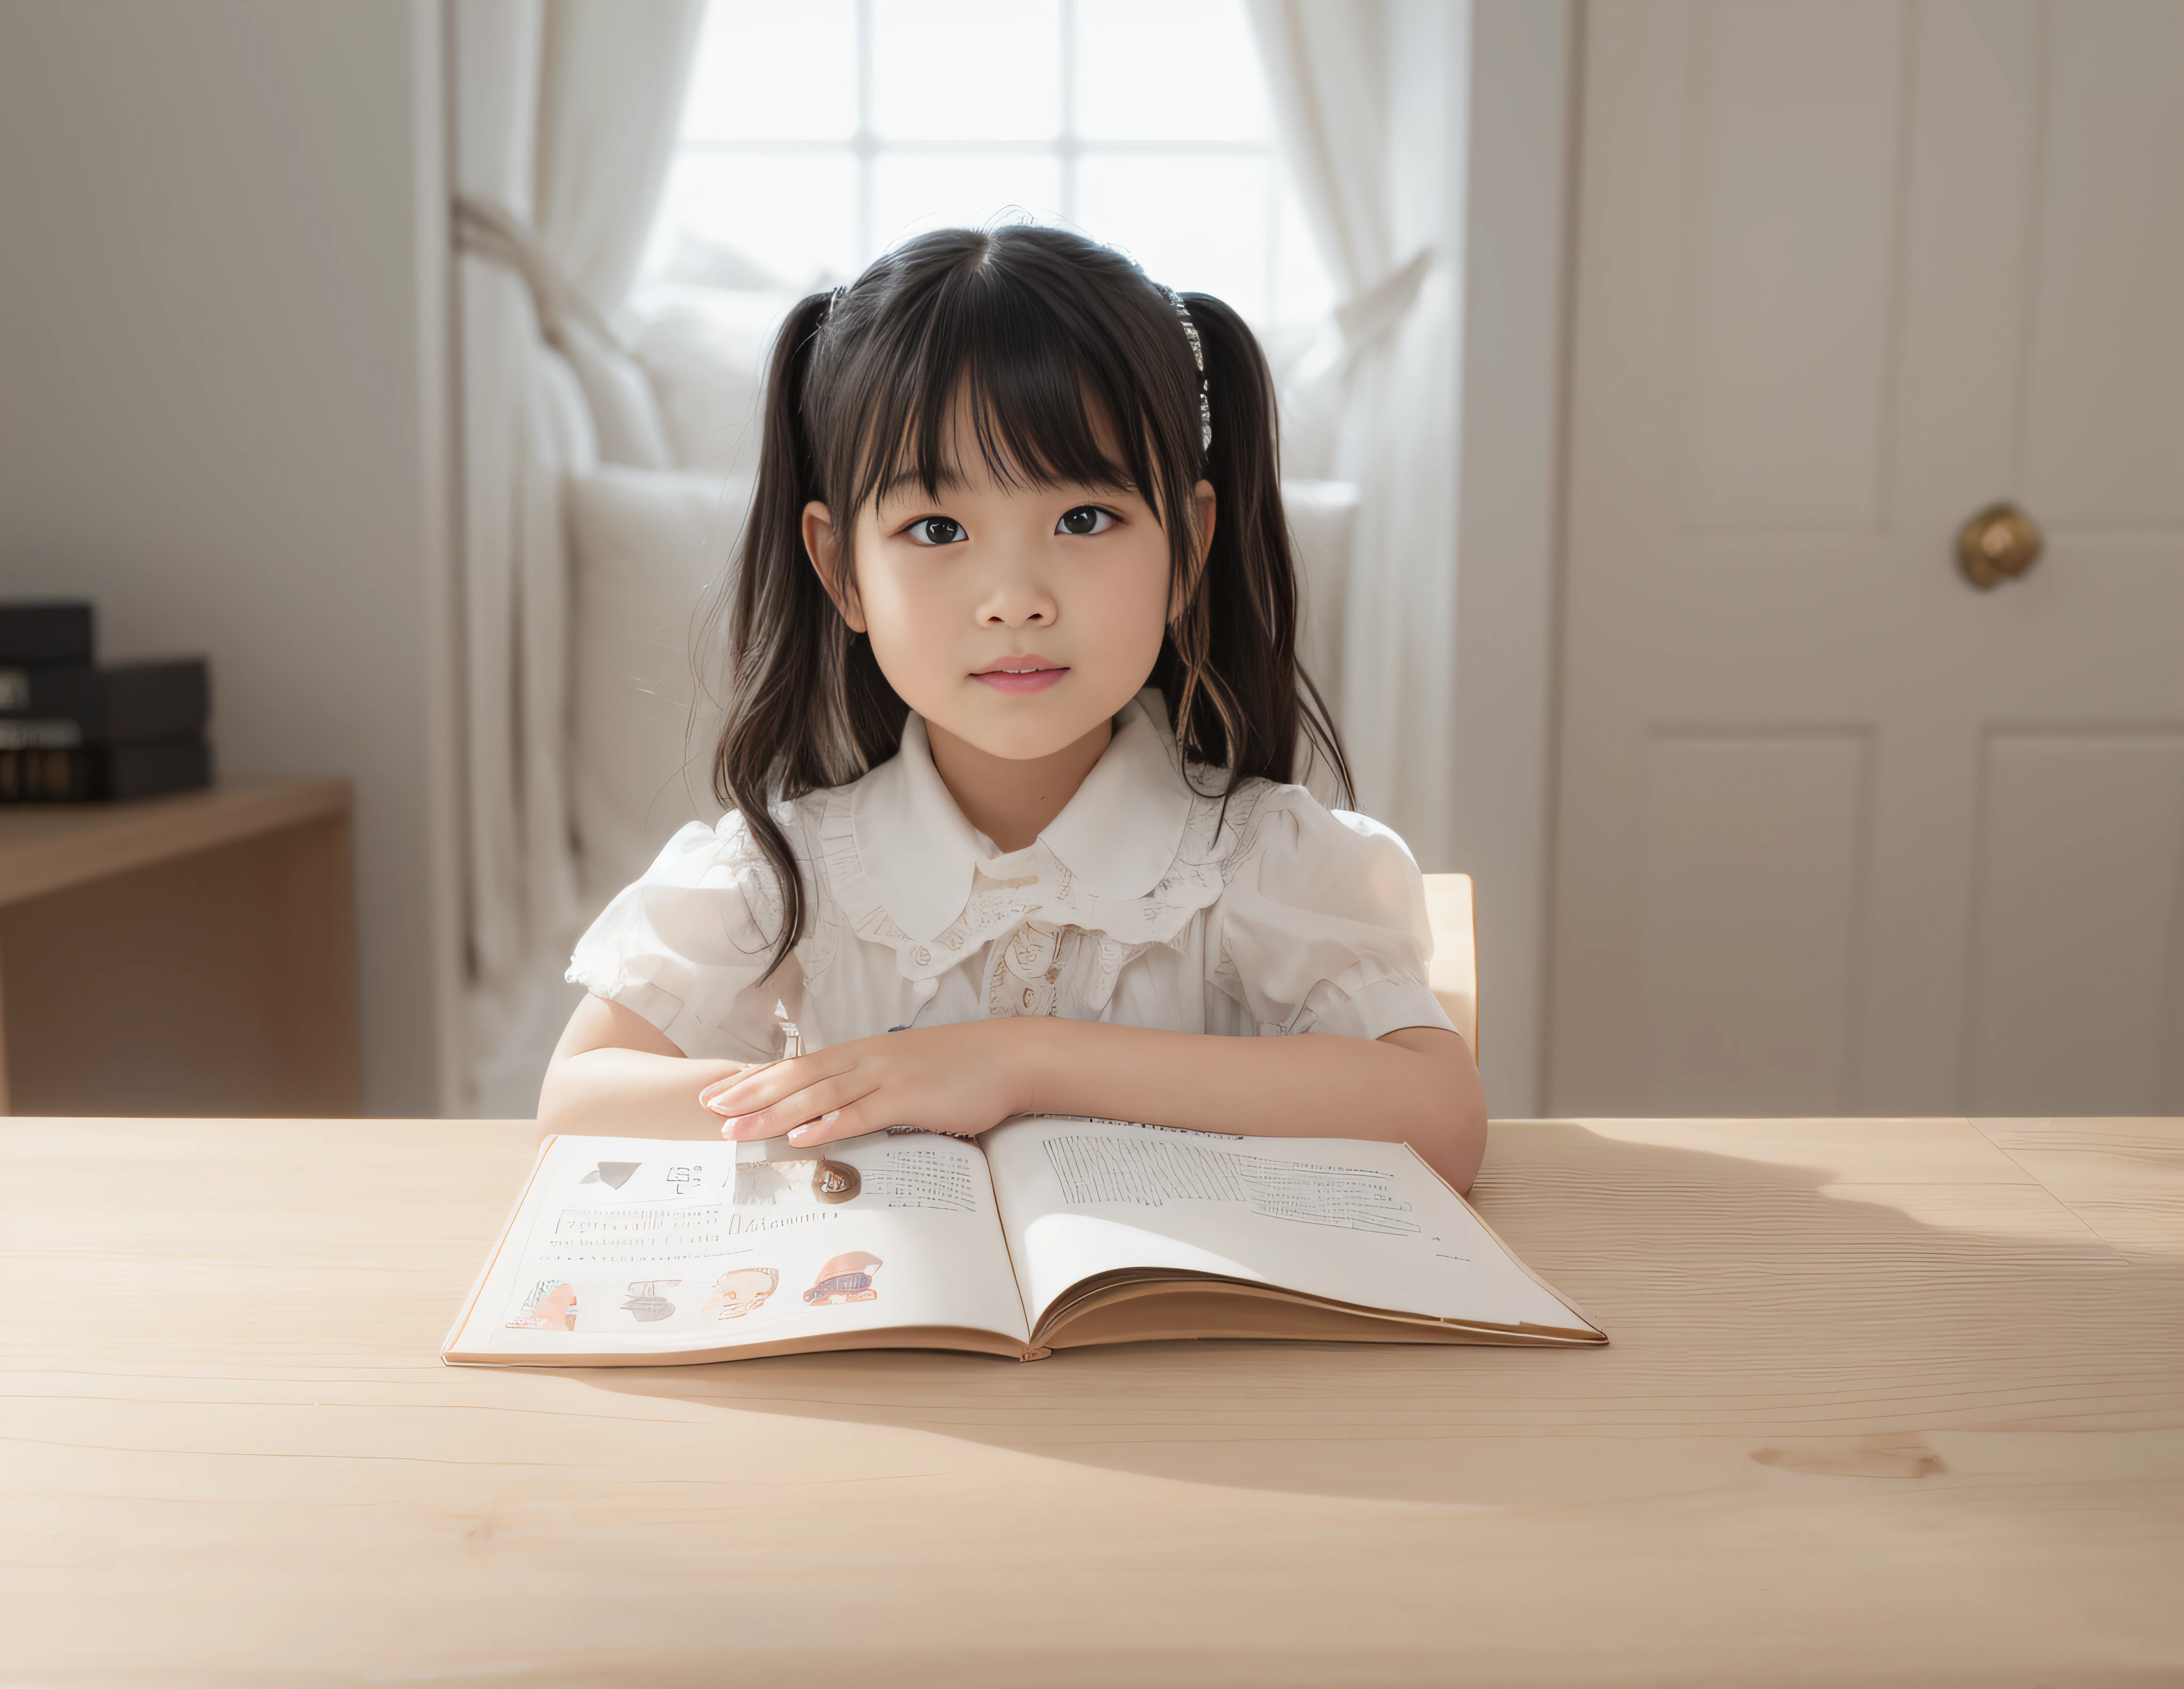 Inside the white study， reading，Black hair，manga book，Place one hand on the other，An open book，A natural hand，Creamy texture，mano，A natural hand，Flat hands。